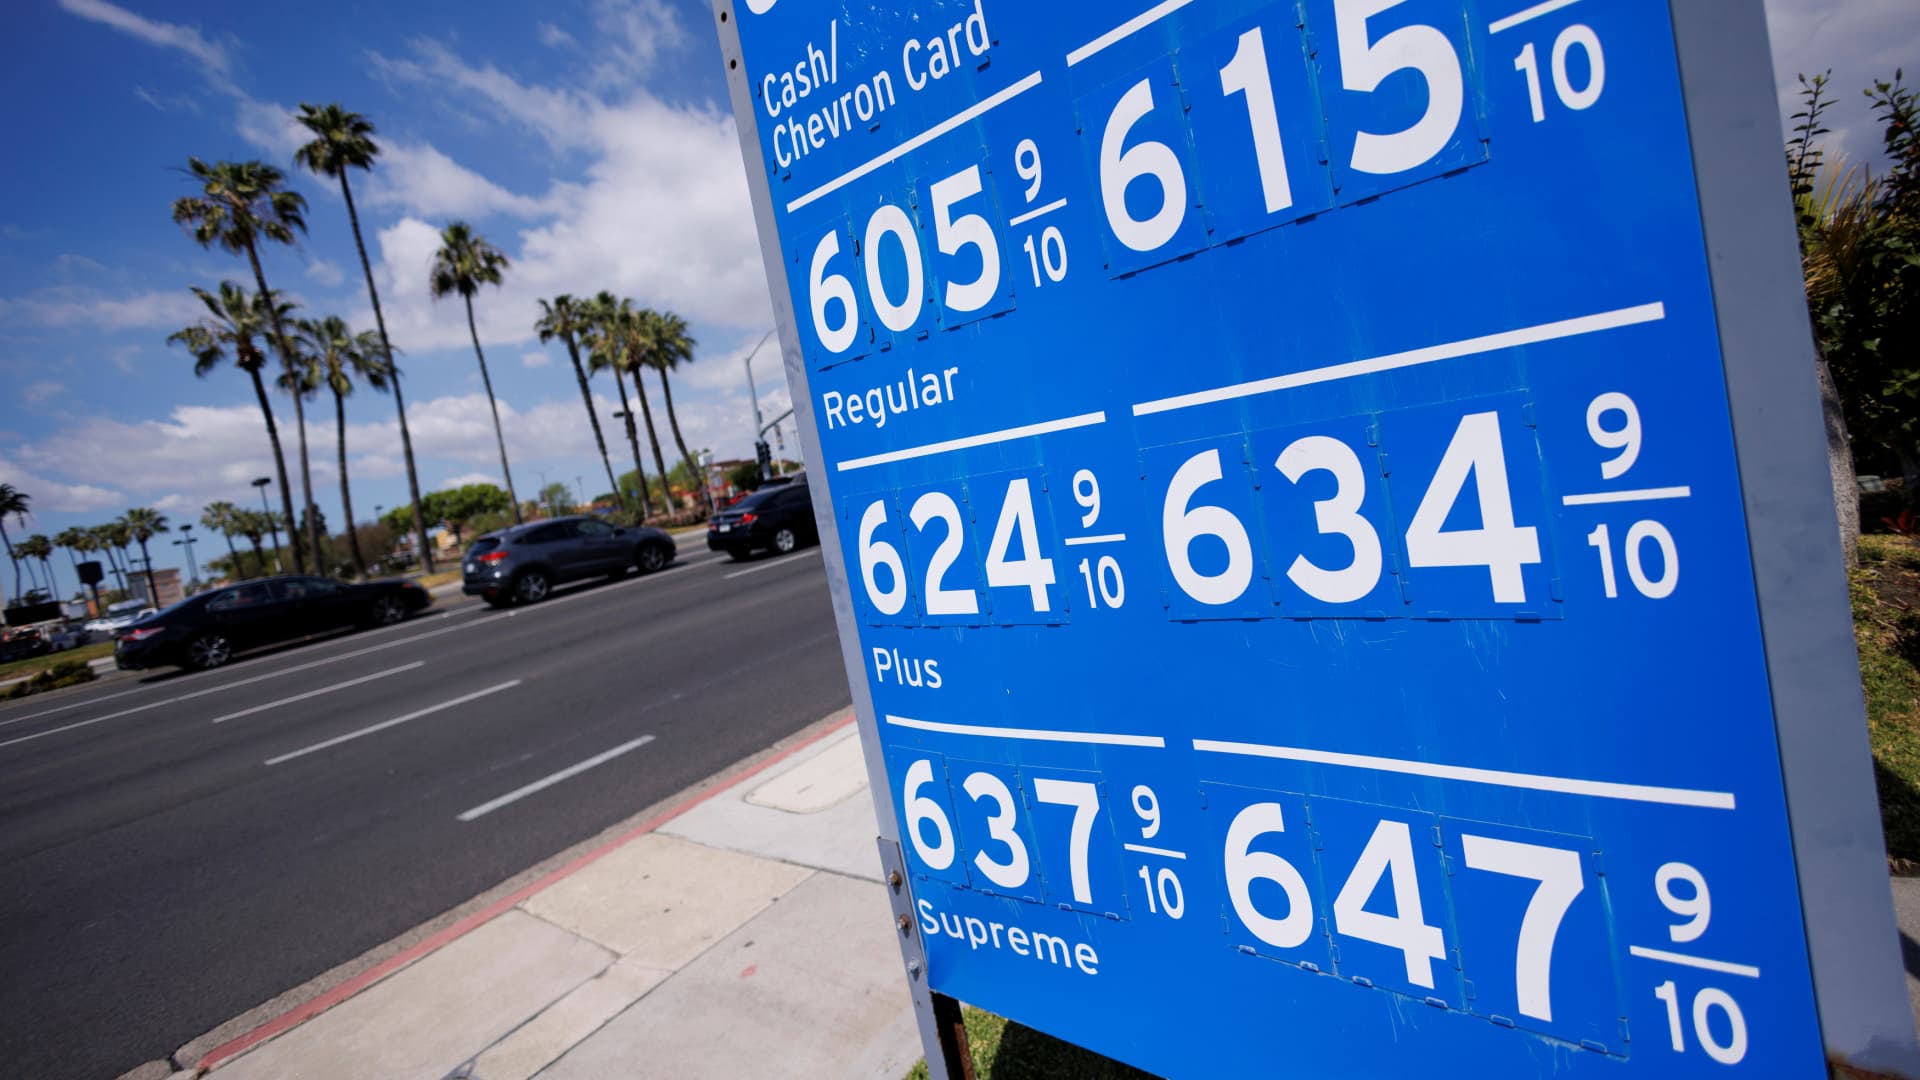 Gasoline could top $5 a gallon this summer, causing more pain for consumers